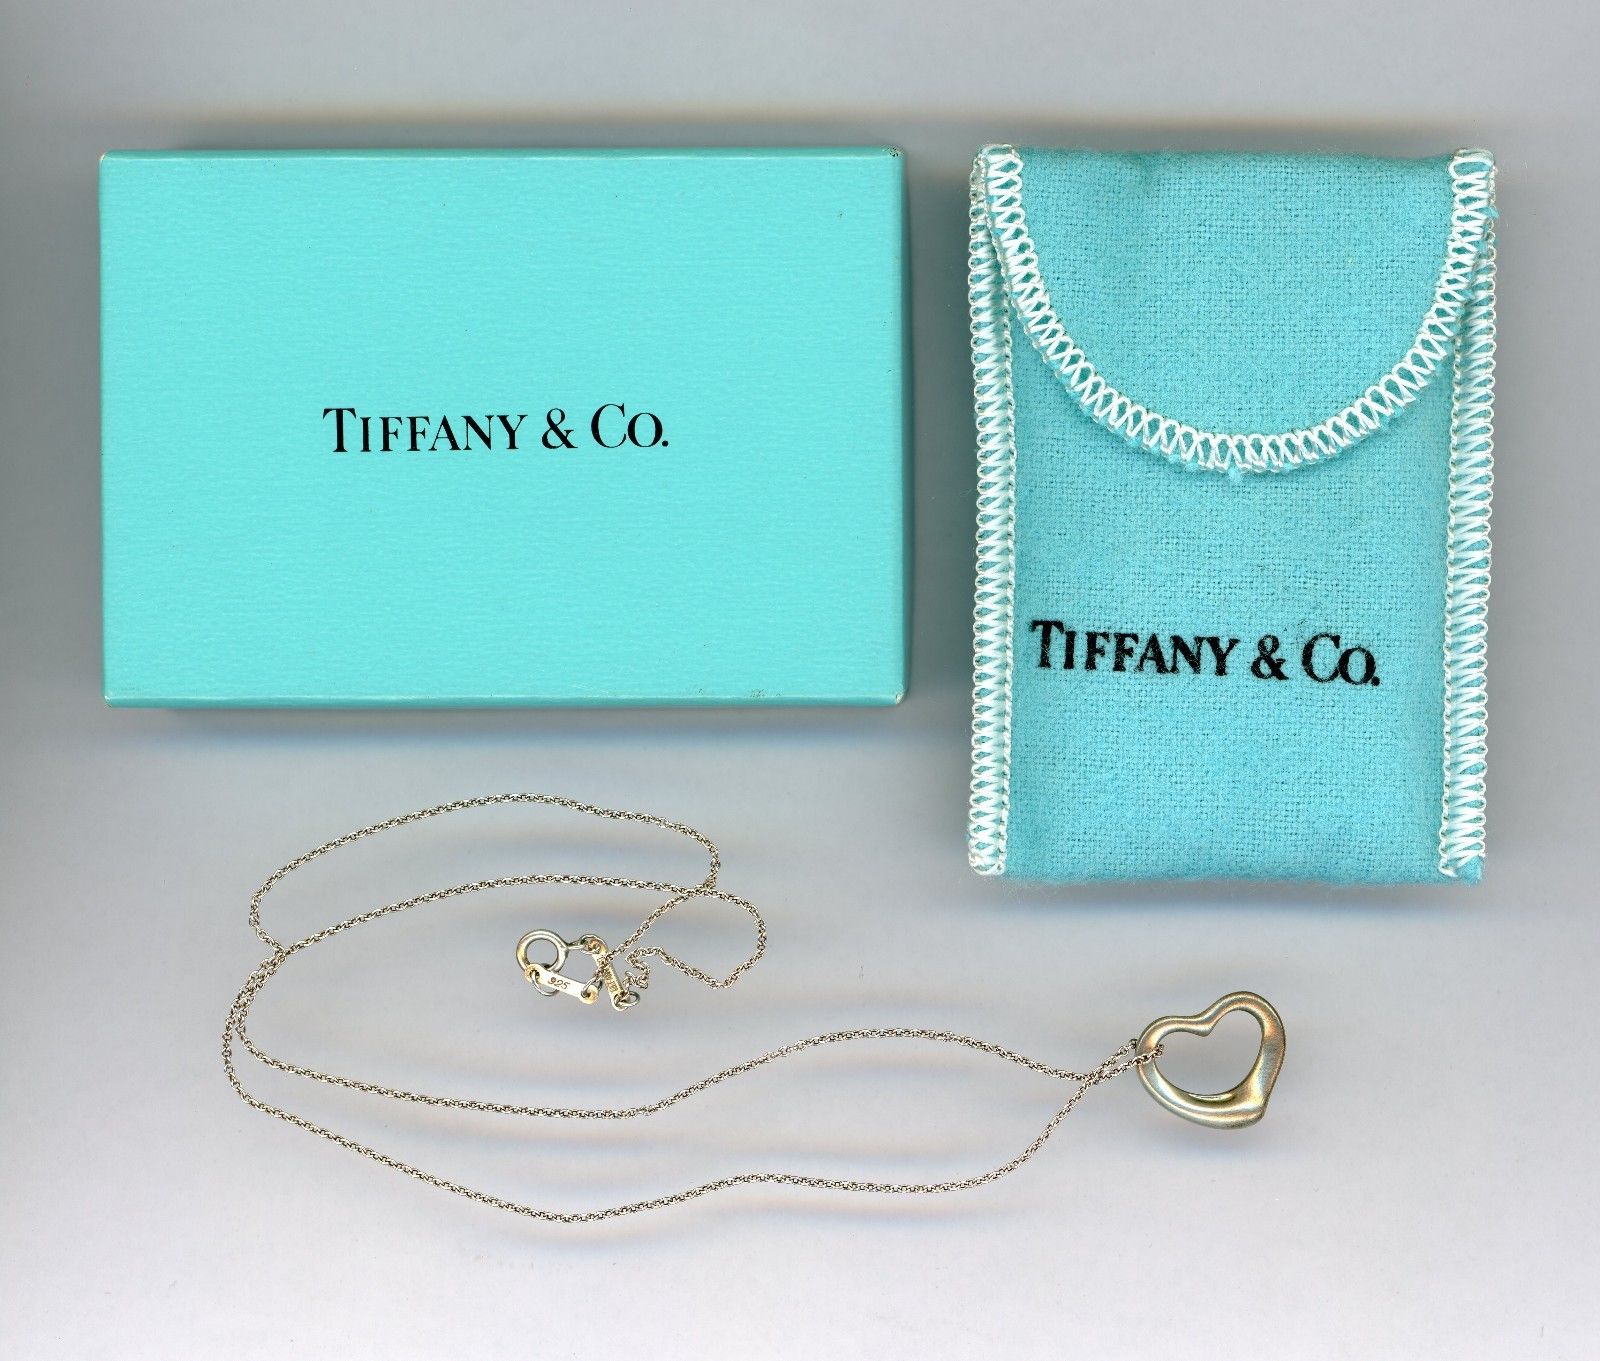 jewellery brands: Tiffany's entry into 